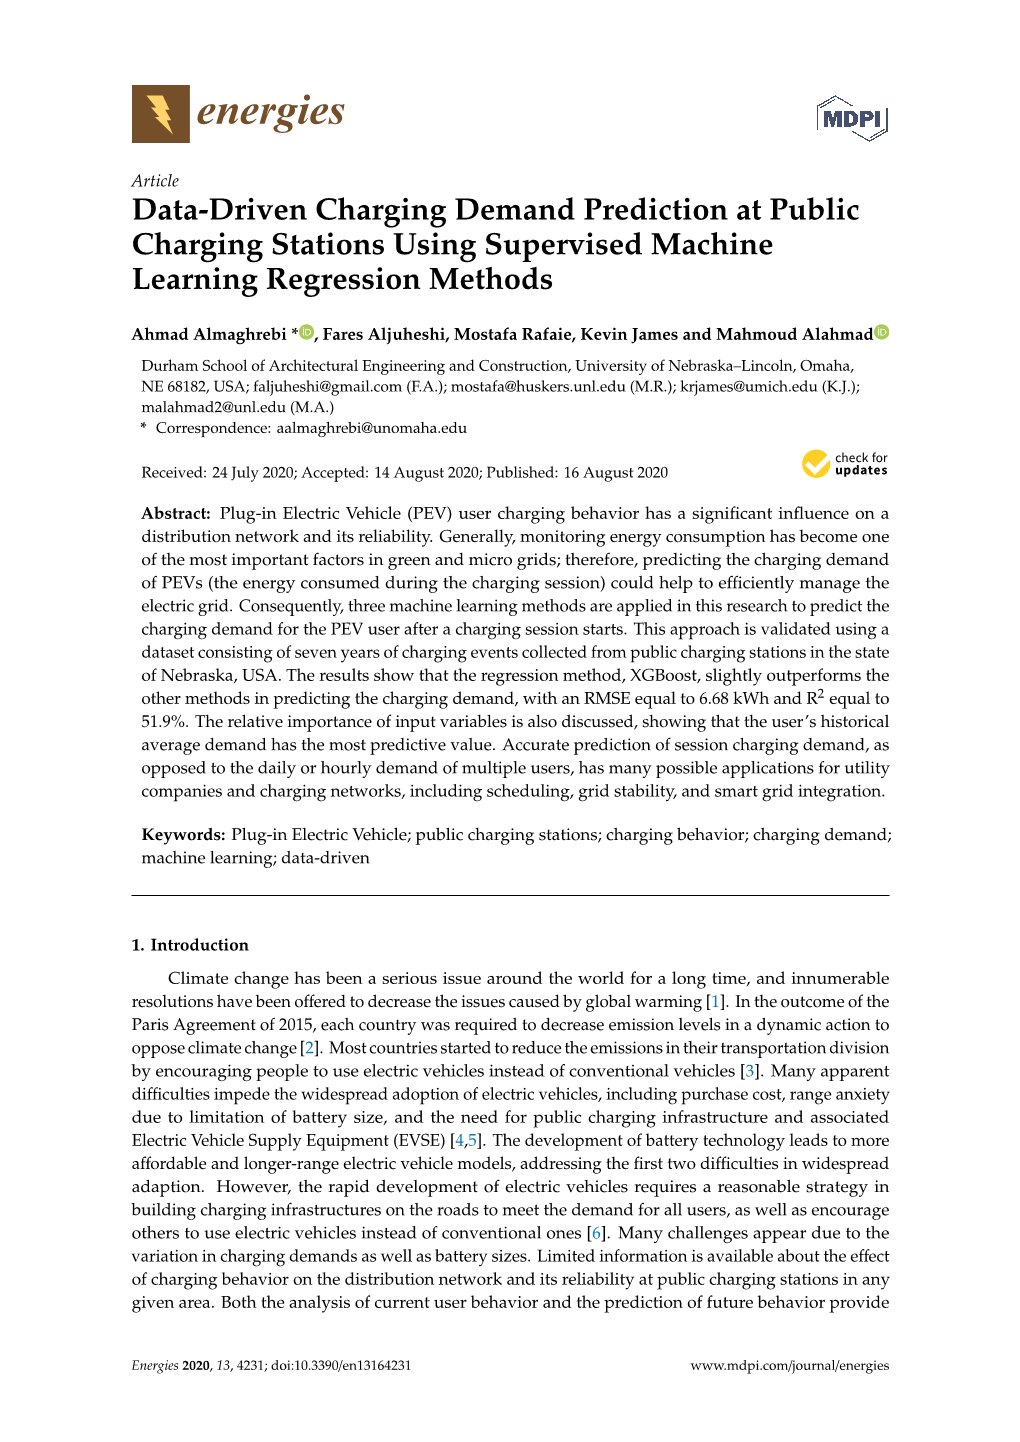 Data-Driven Charging Demand Prediction at Public Charging Stations Using Supervised Machine Learning Regression Methods